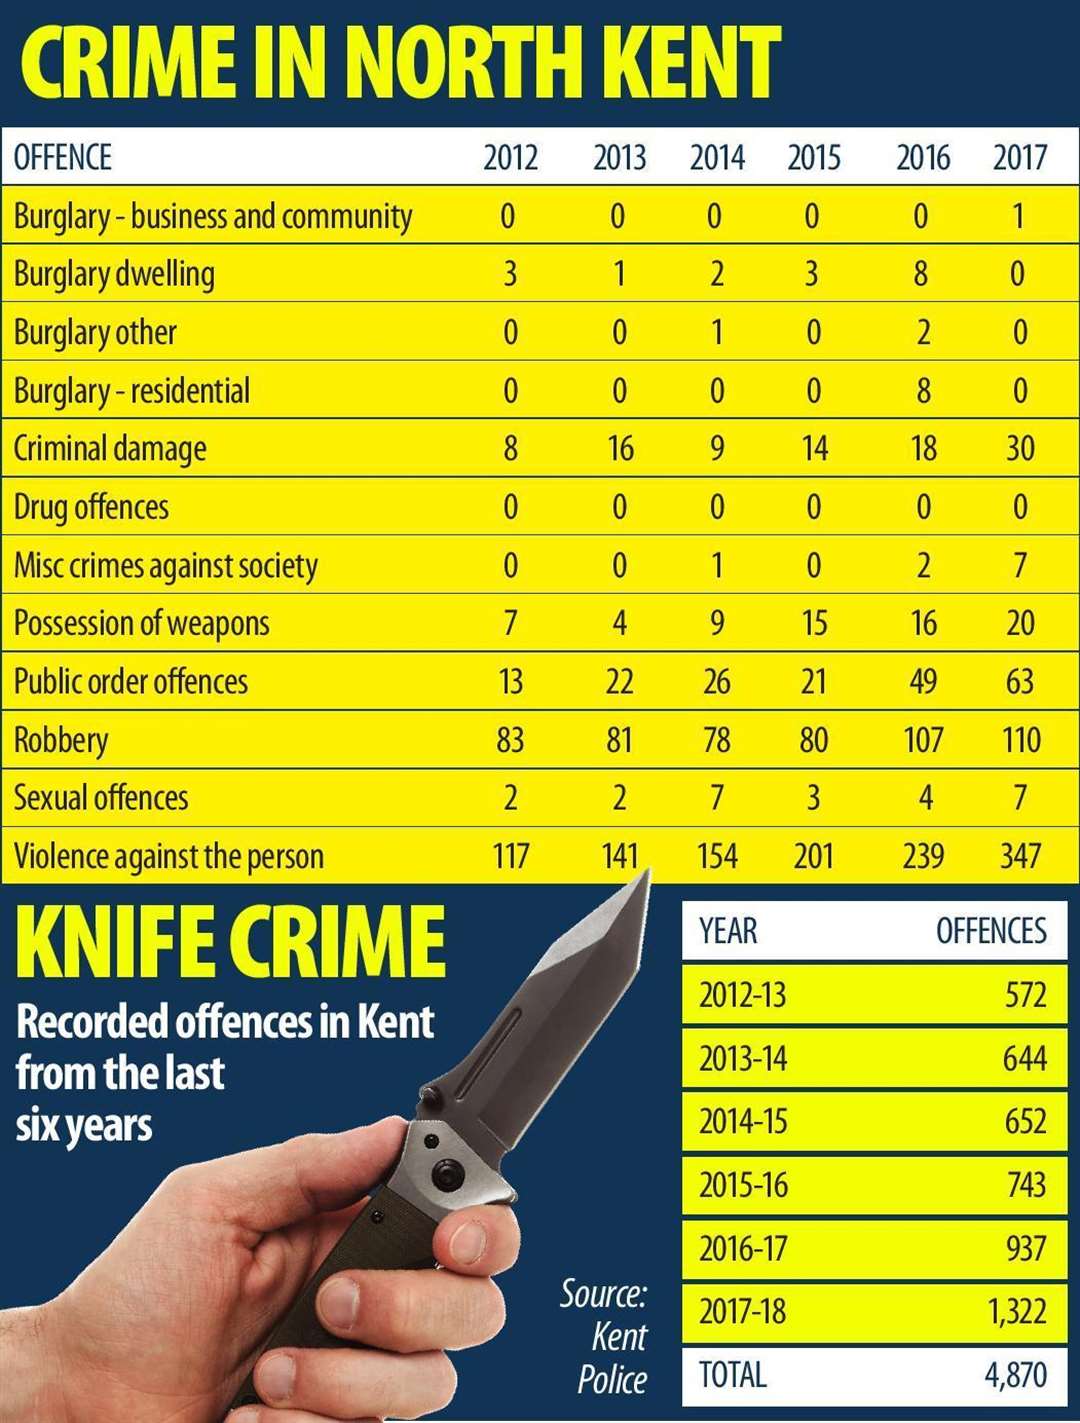 Knife crime statistics in North Kent between 2012 and 2017